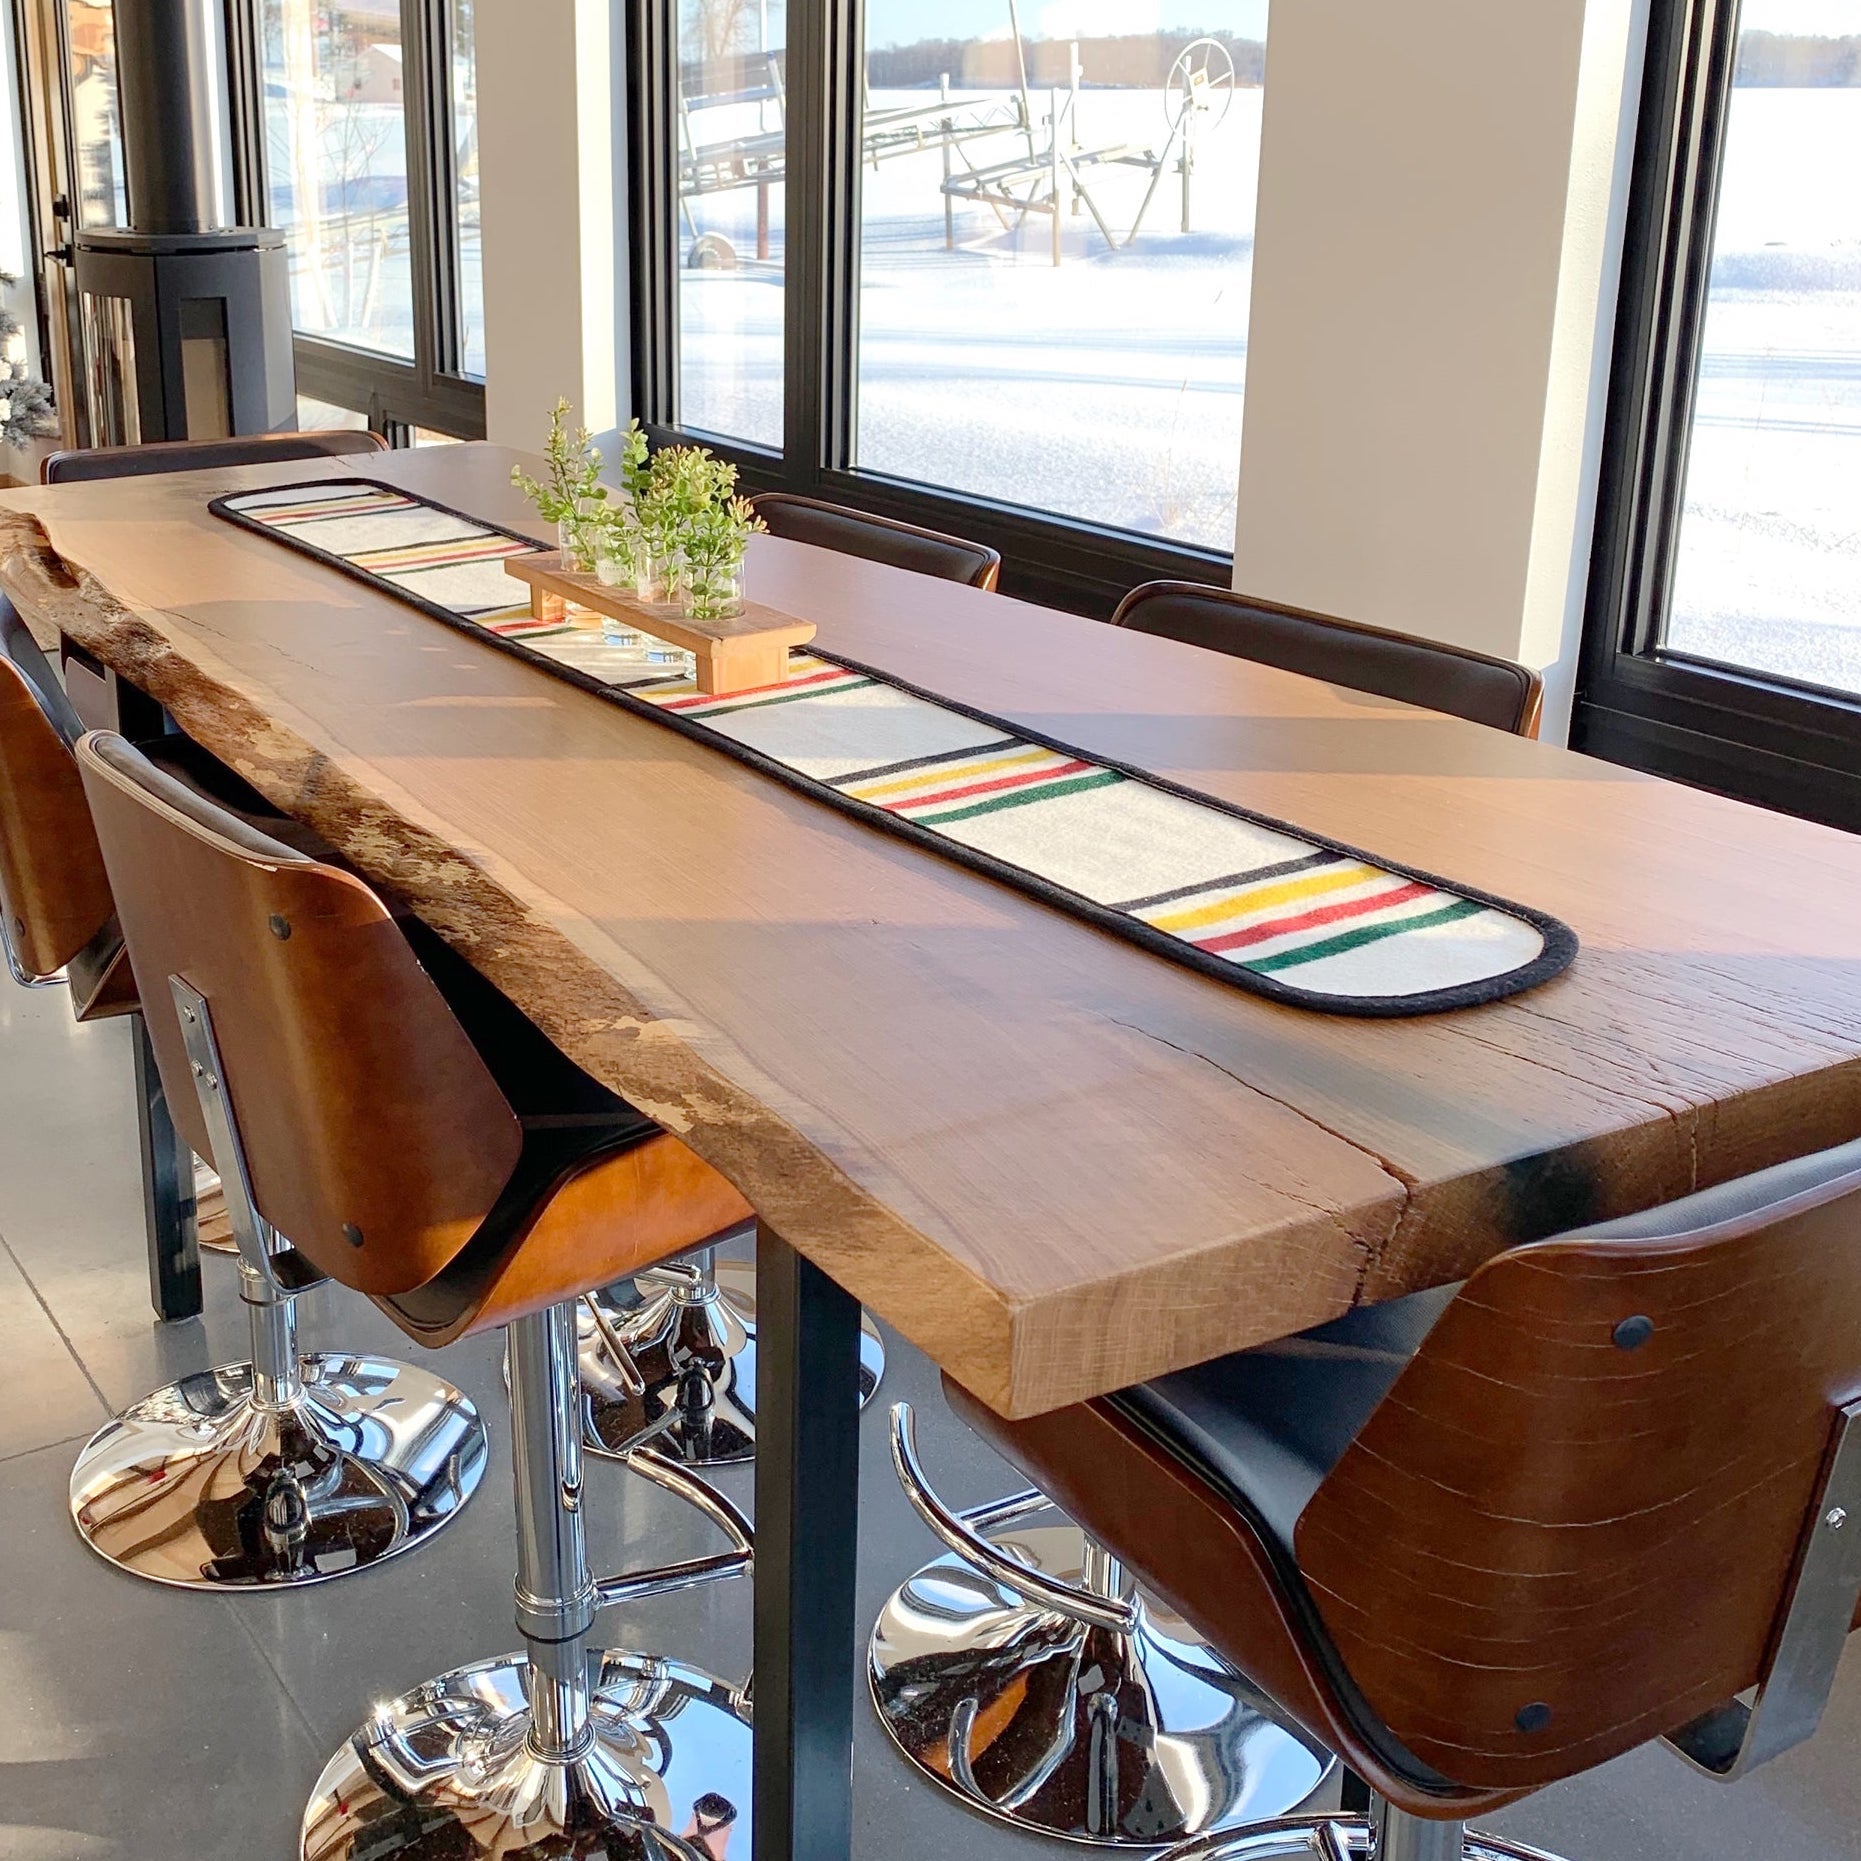 Custom made live-edge conference tabletop on metal base with leather barstools.